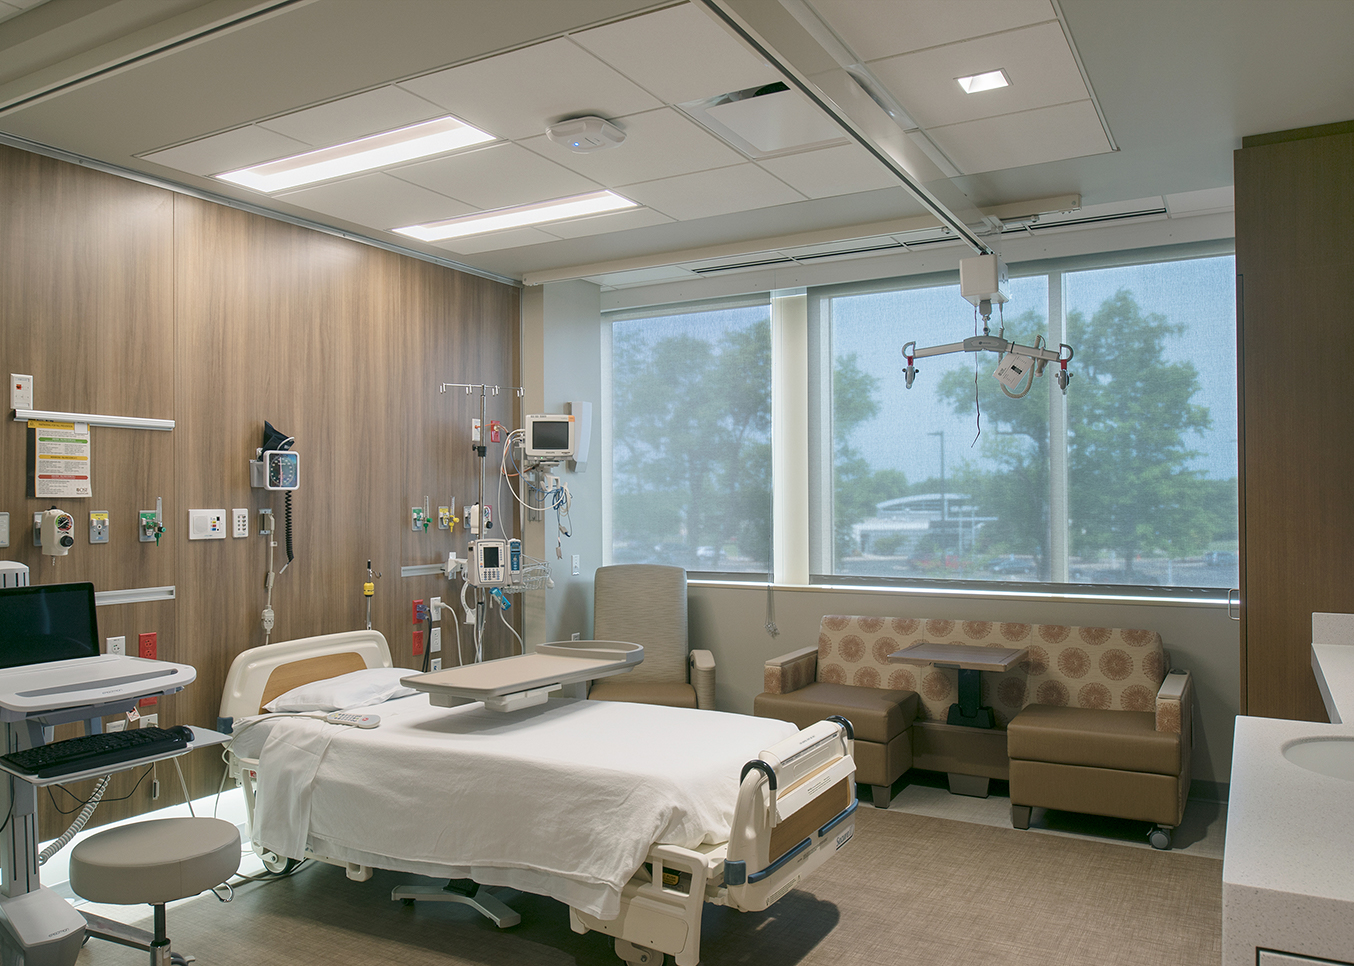 Serenity tandem overbed lighting in a soothing, nature-inspired patient room.